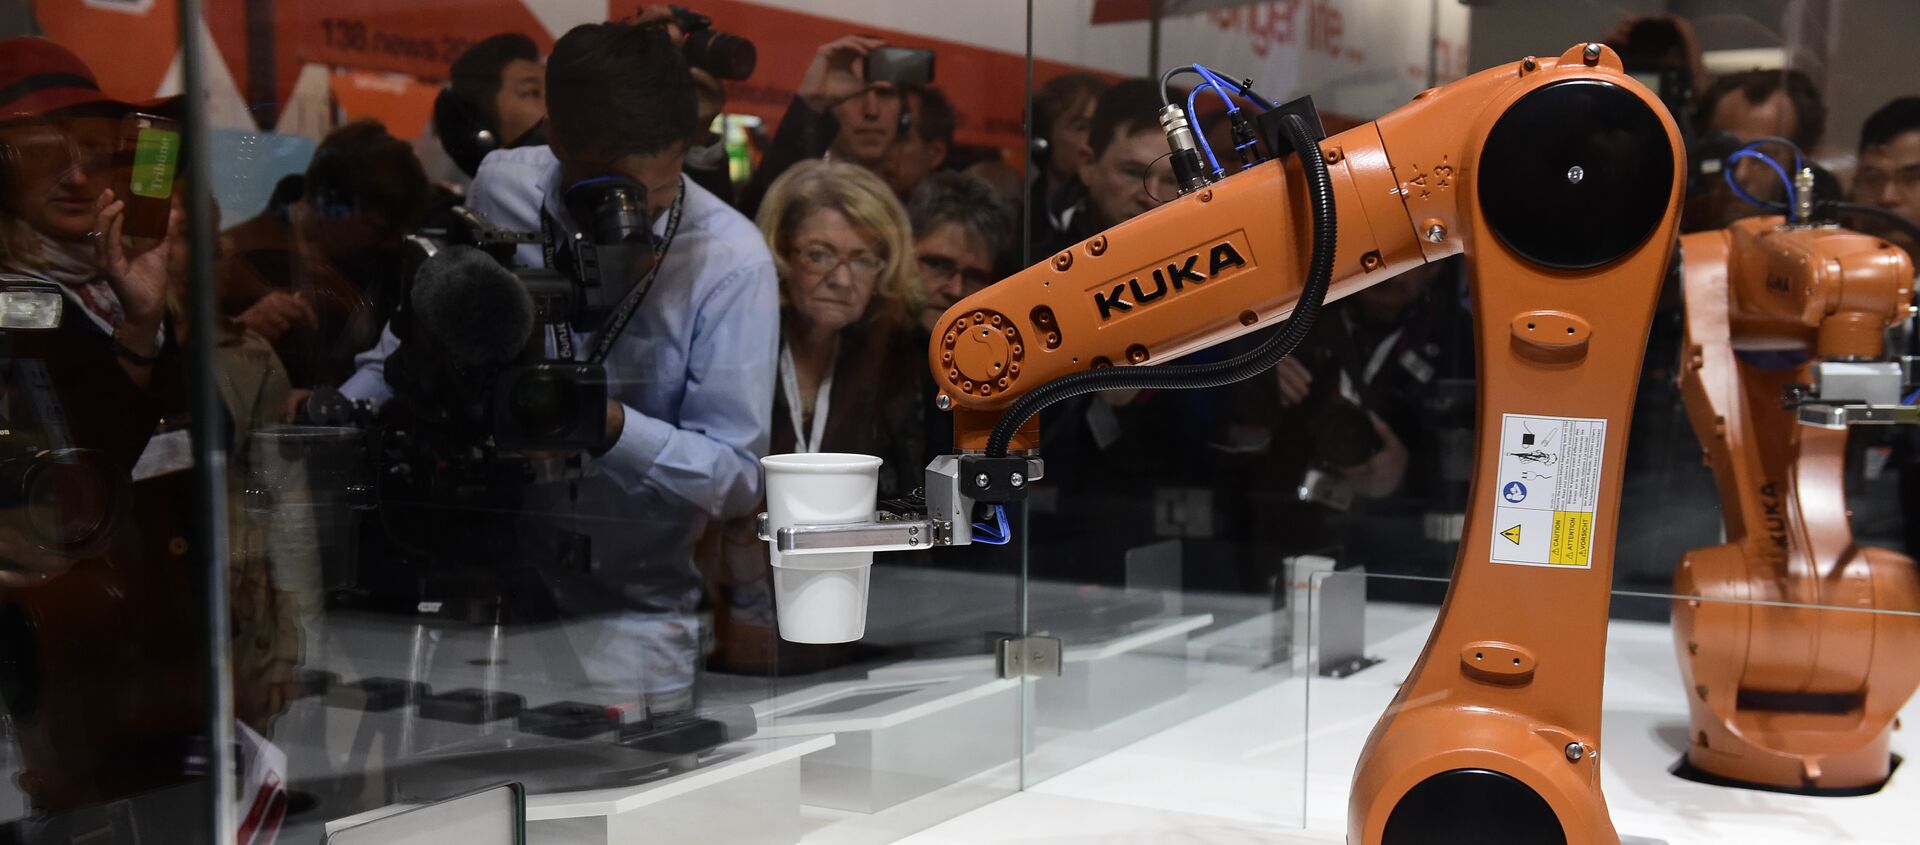 A robot prepares a cup of coffee at the booth of robotics manufacturer KUKA on the eve of the opening of the Hannover Messe (Hanover fair) in Hanover, northern Germany, on April 23, 2016 - Sputnik International, 1920, 23.12.2020